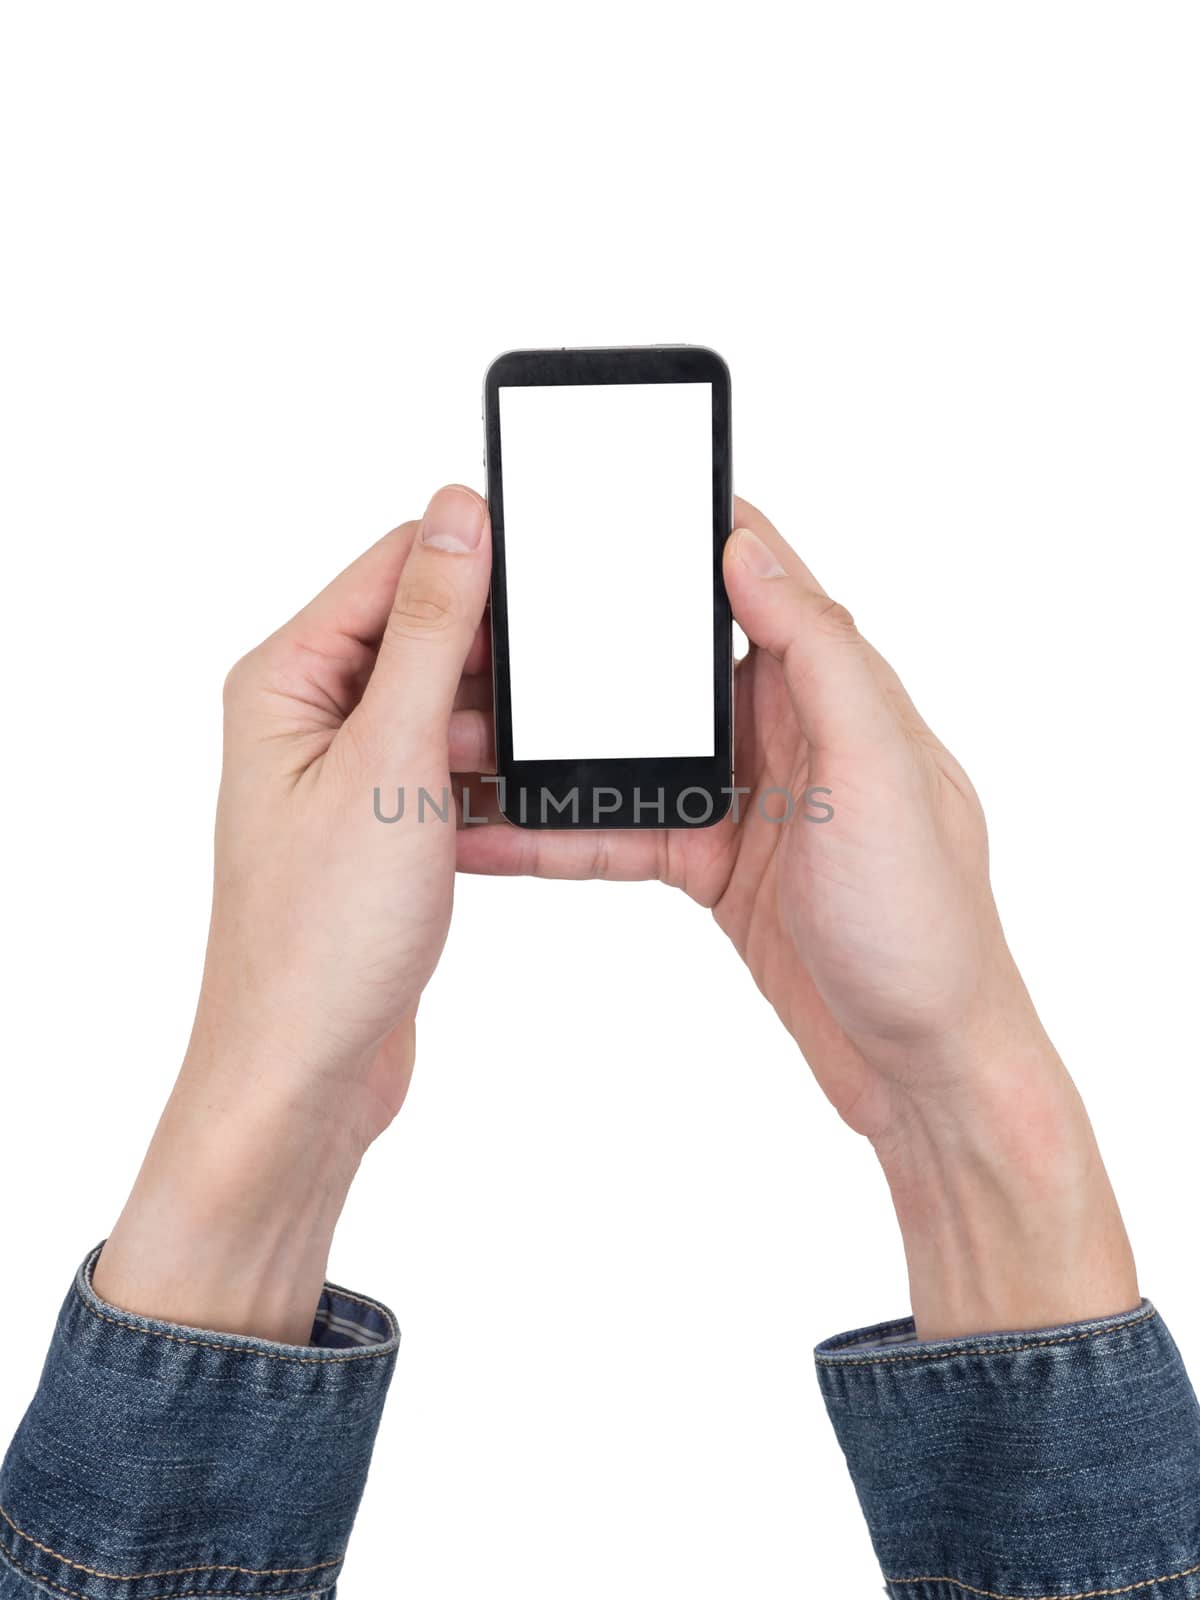 Male hands holding a mobile phone with touch blank white screen on white background.